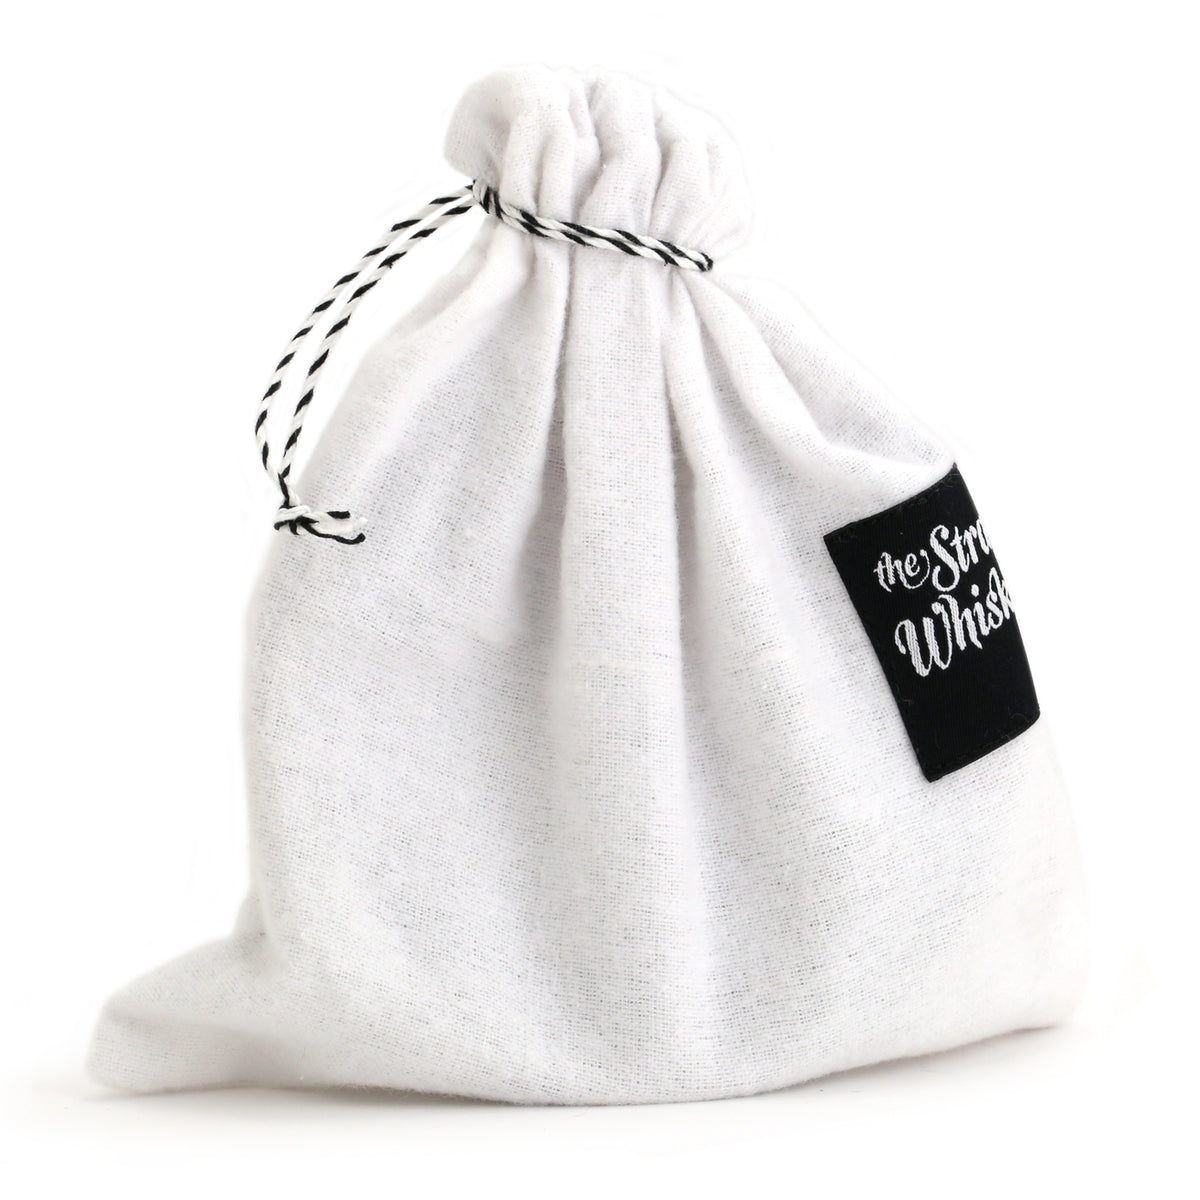 Soft white flannel storage bag for the stainless-steel lather bowl